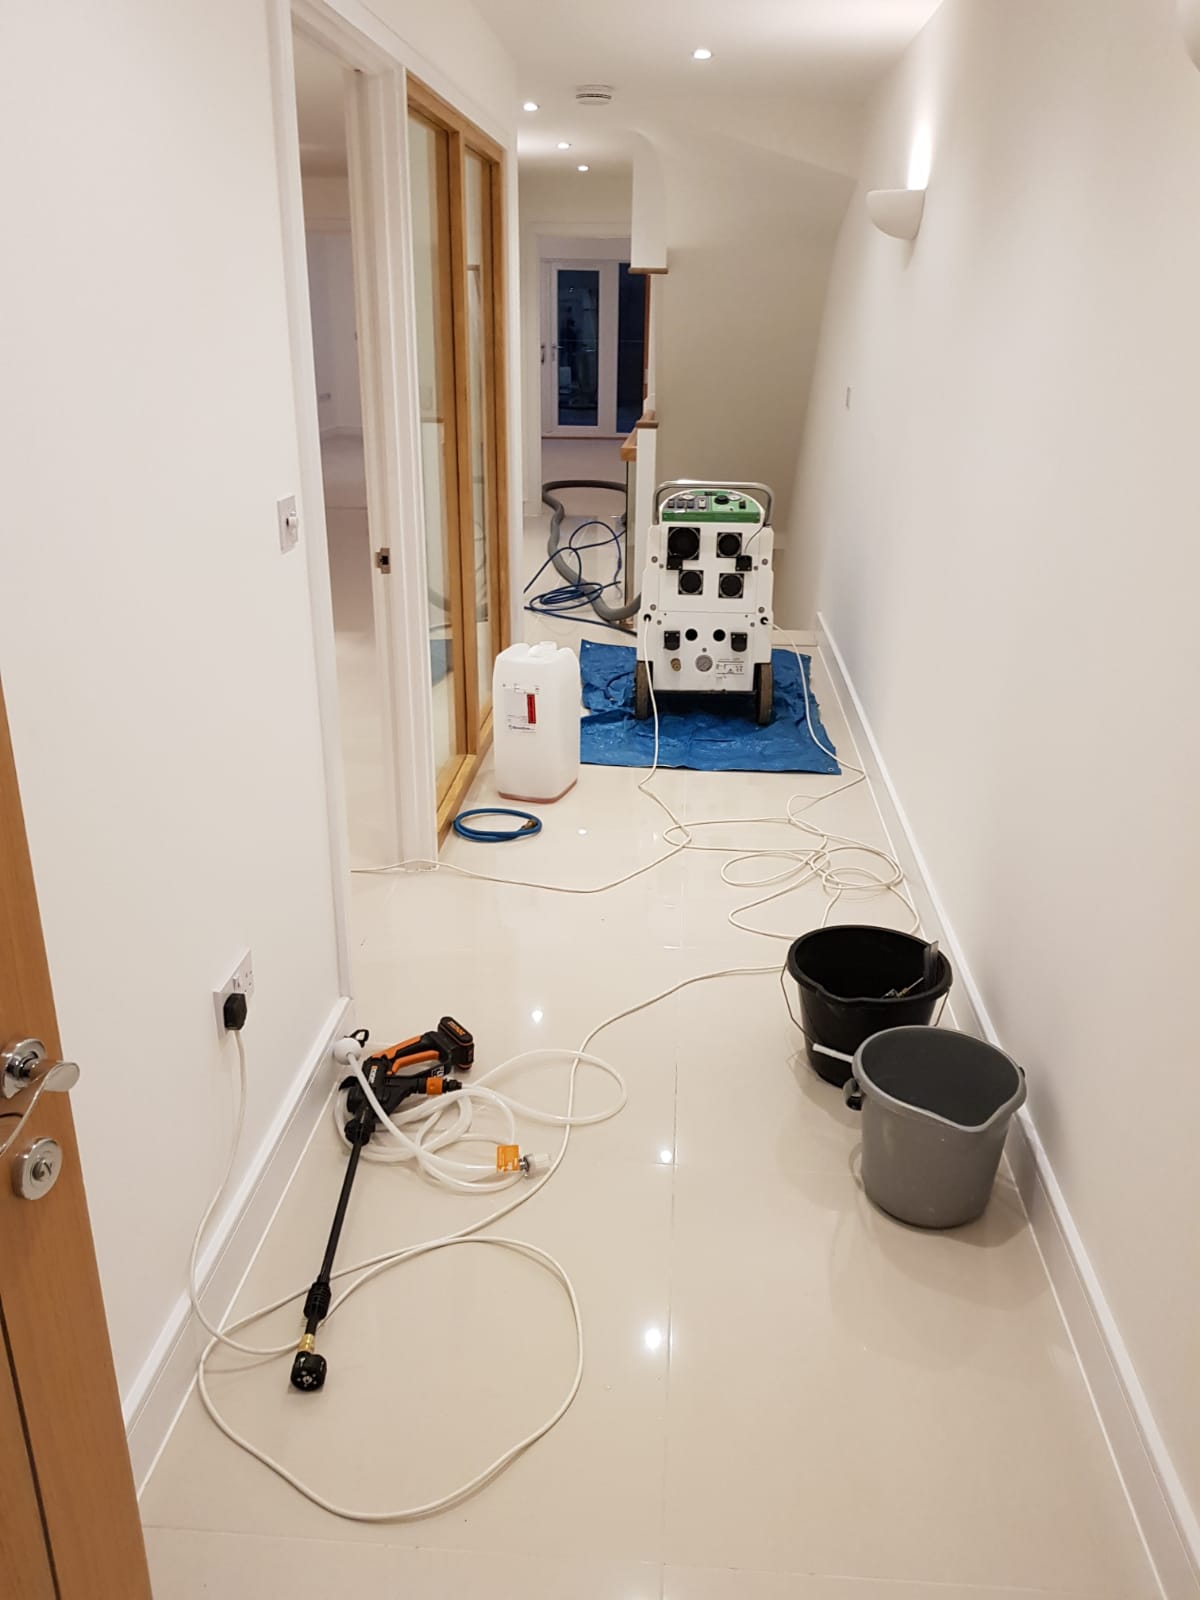 Hard floor cleaning in commercial premises